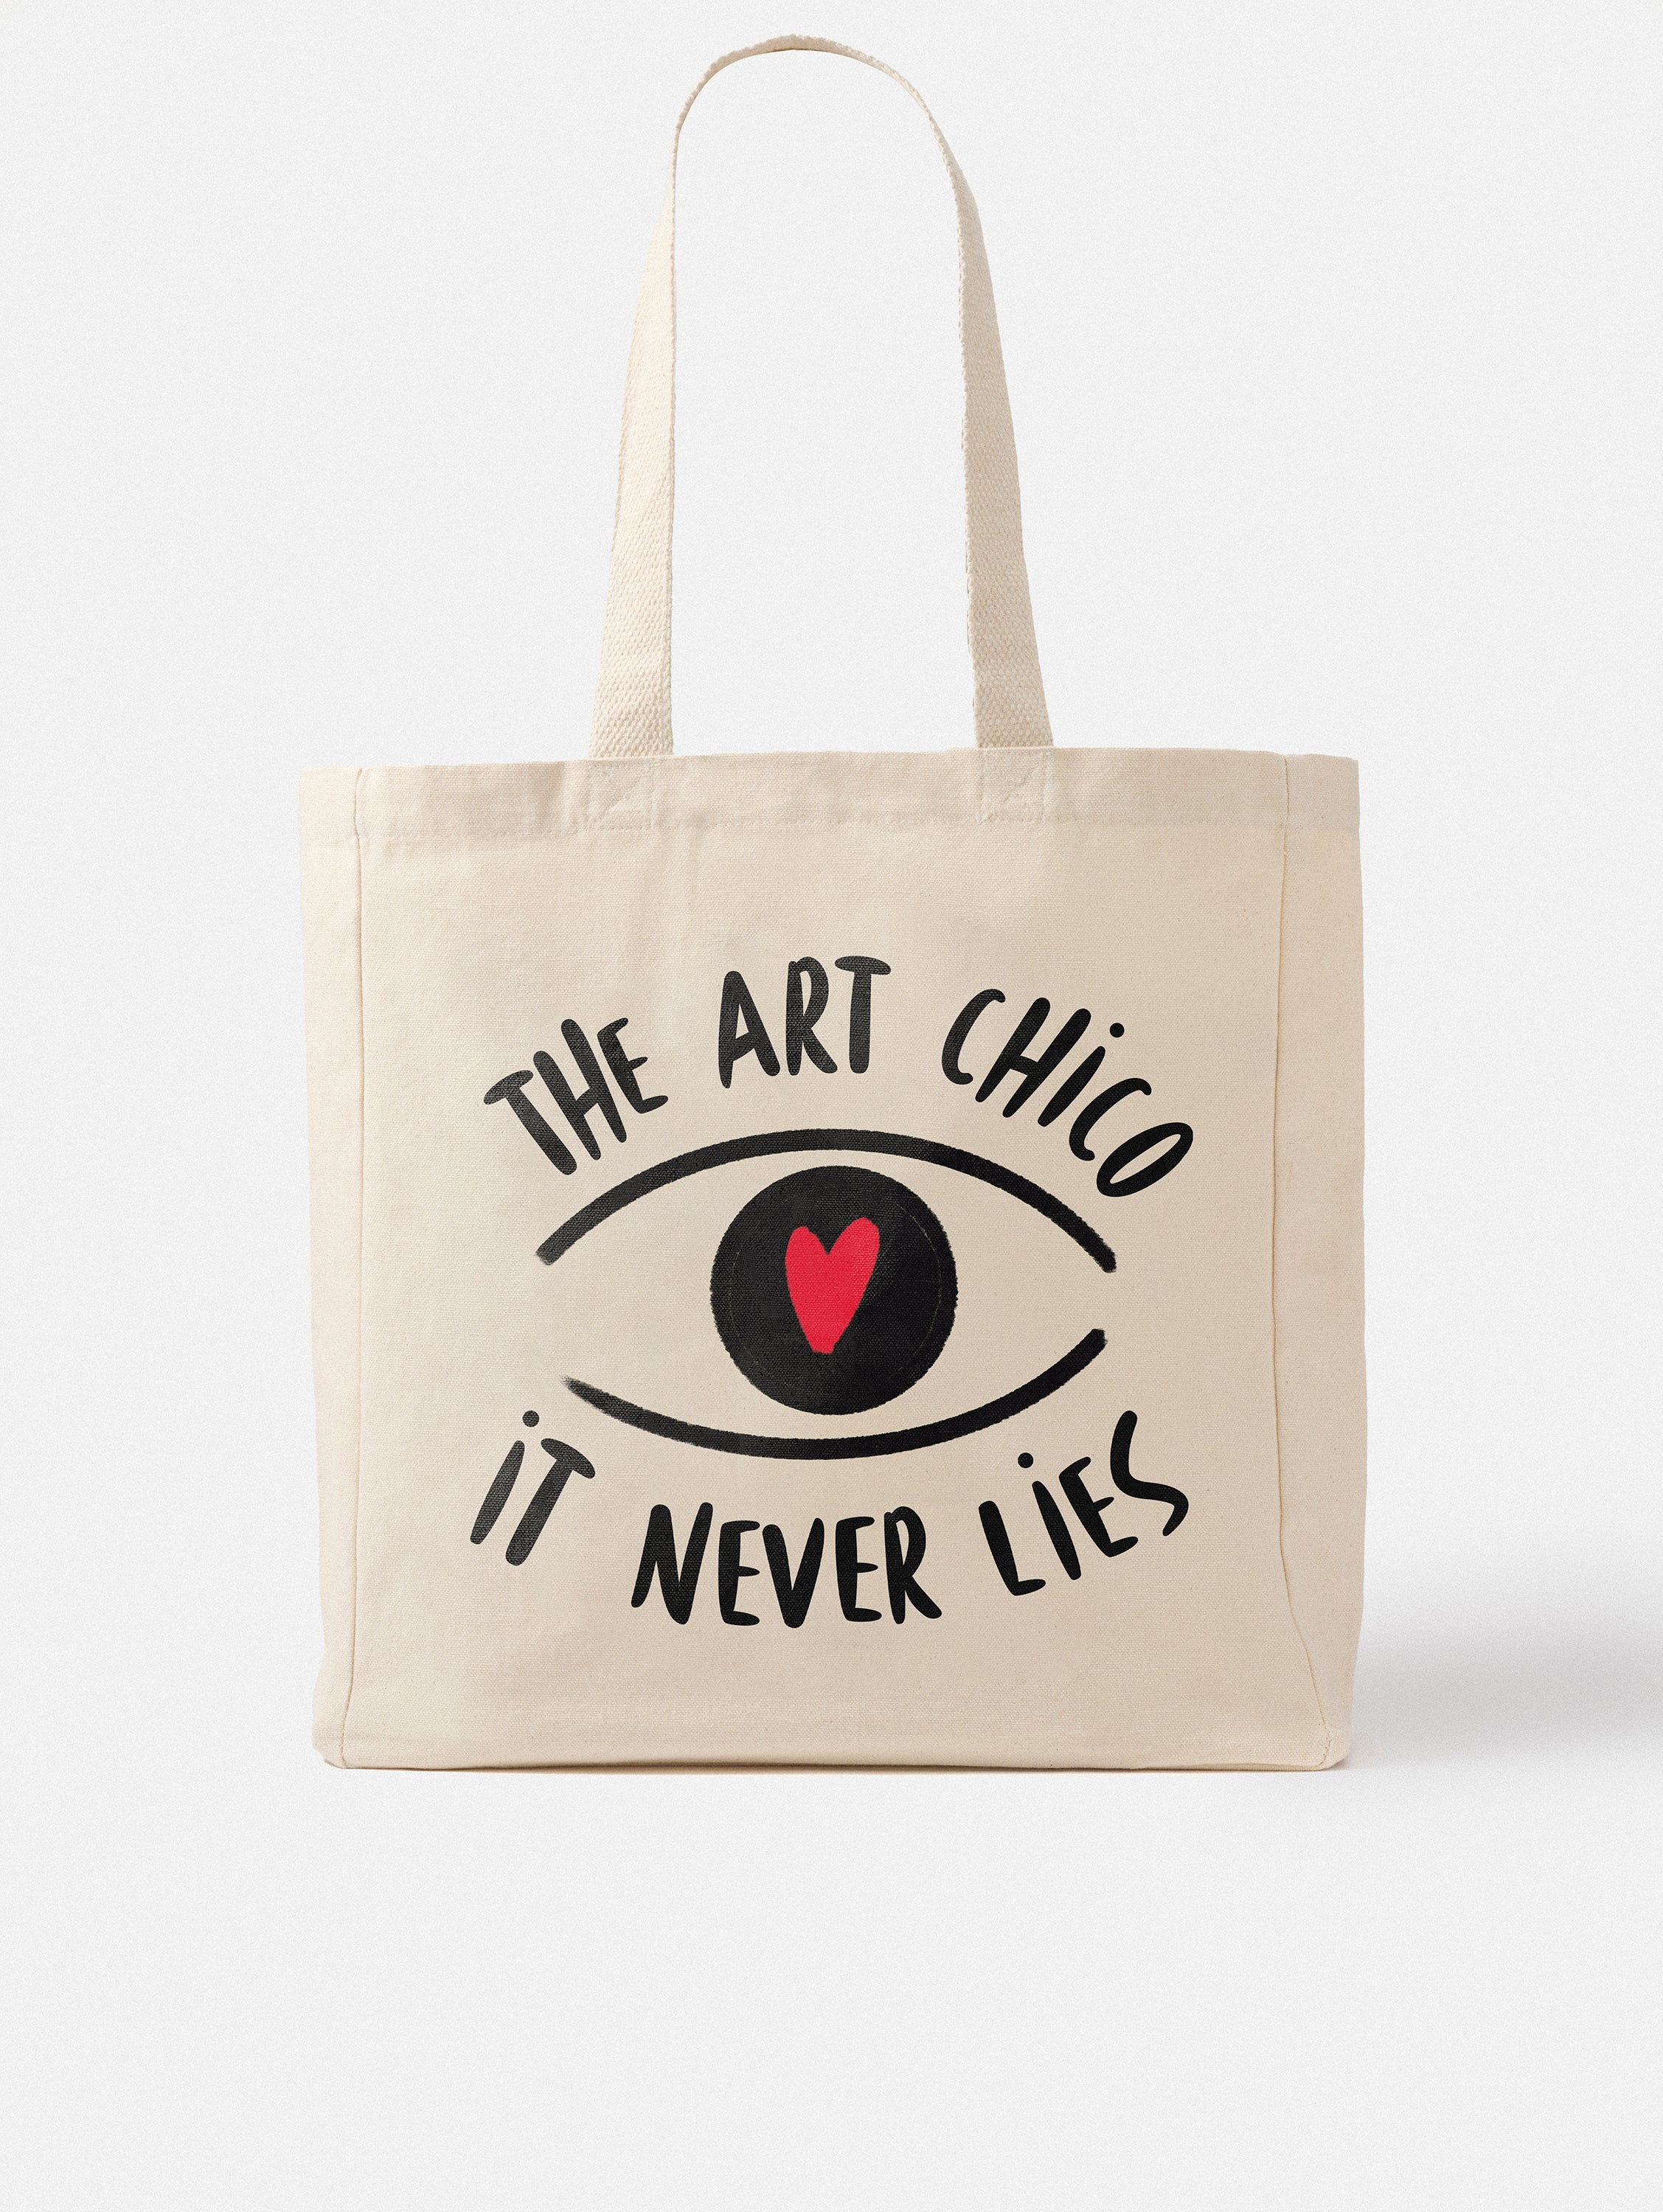 TOTE THE ART CHICO, IT NEVER LIES (VALENTINSTAG-EDITION)